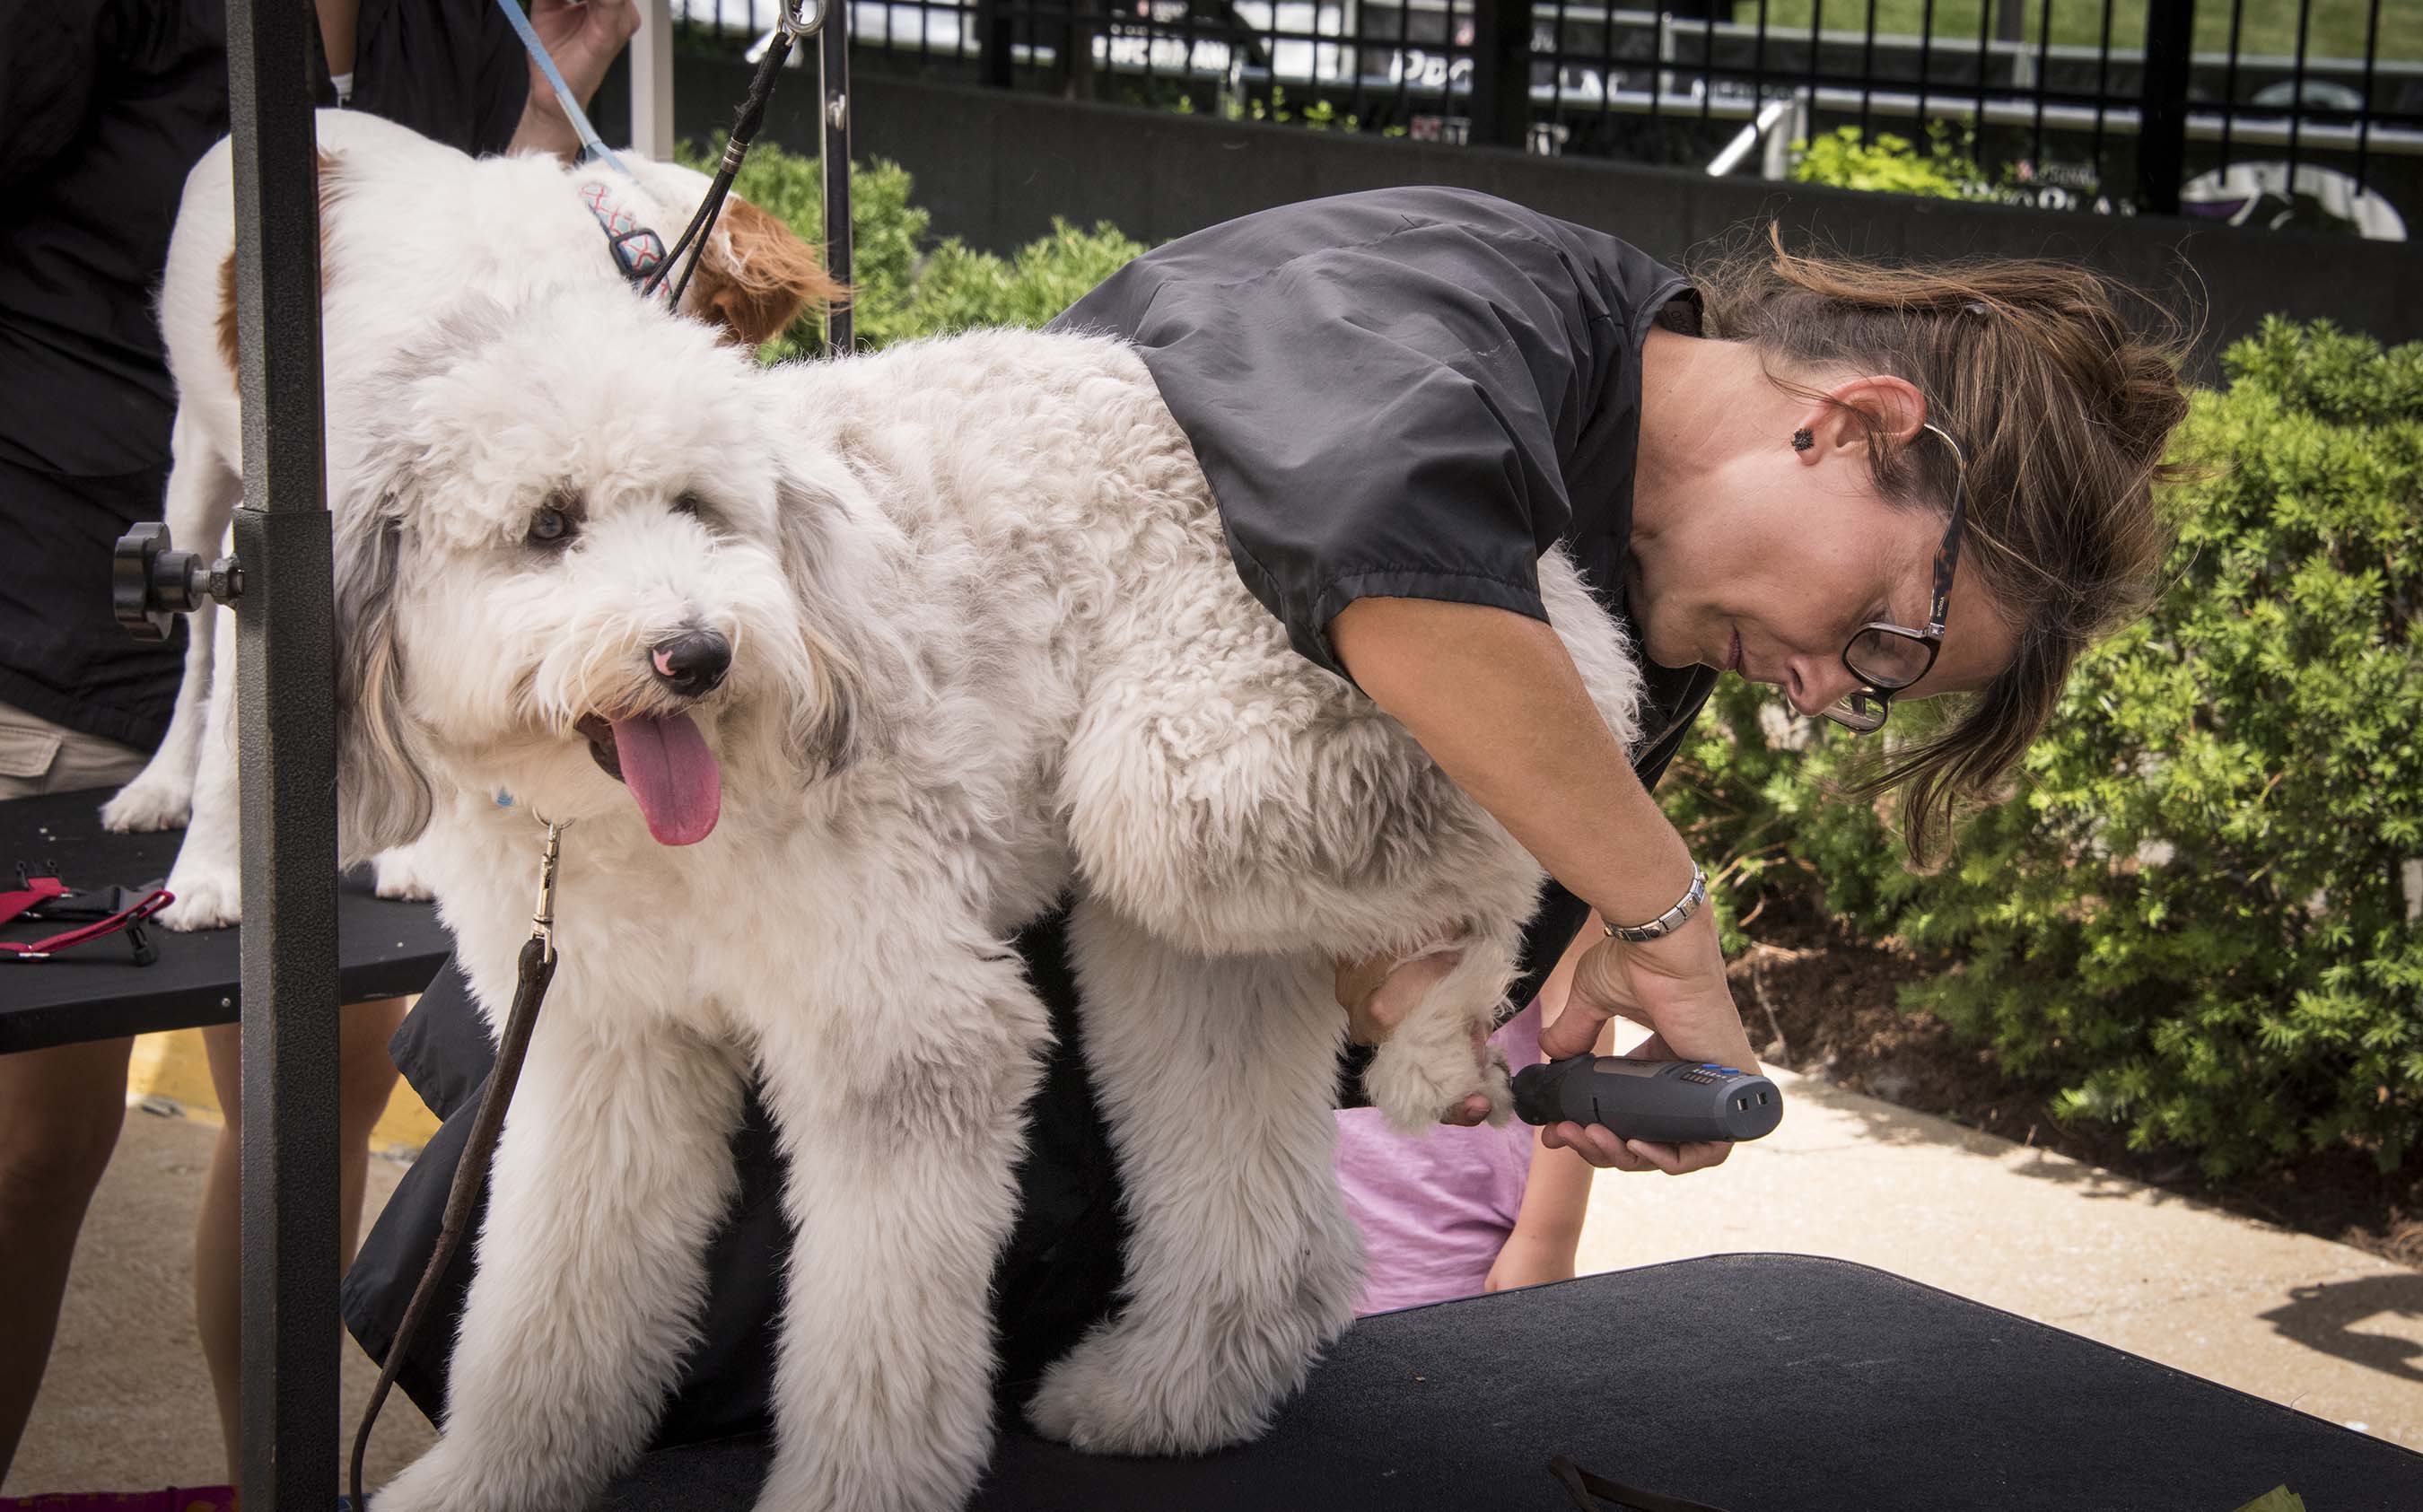 Purina helped celebrate #petsatwork with fun activities at the Purina headquarters in St. Louis such as puppy portraits, mobile grooming and a Yappy Hour for associates and their pets